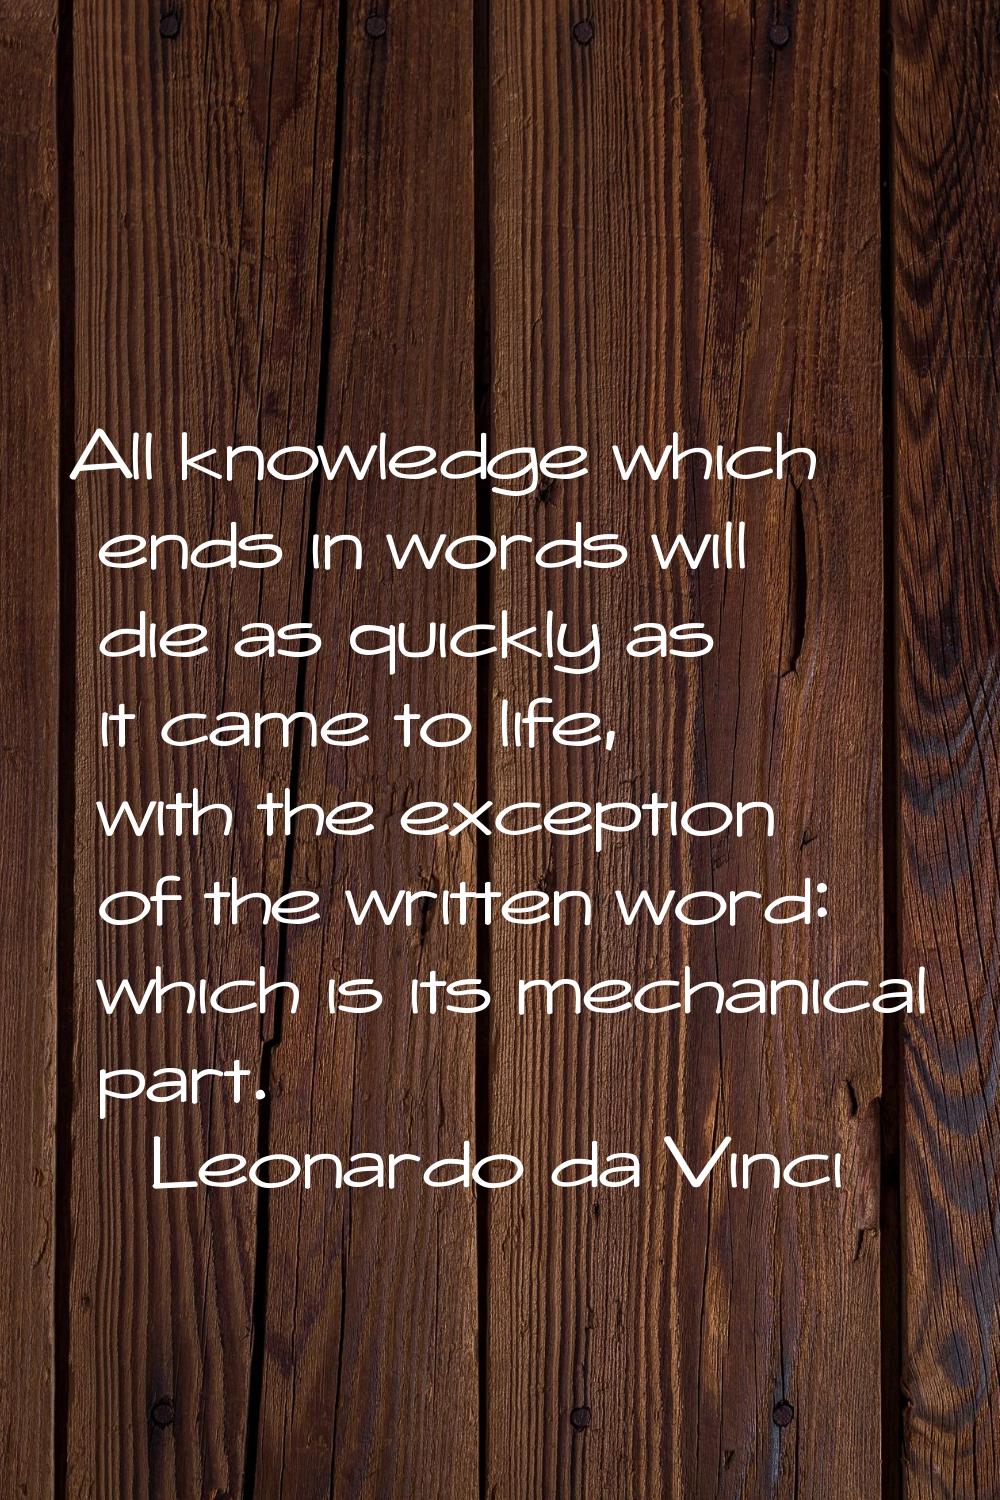 All knowledge which ends in words will die as quickly as it came to life, with the exception of the